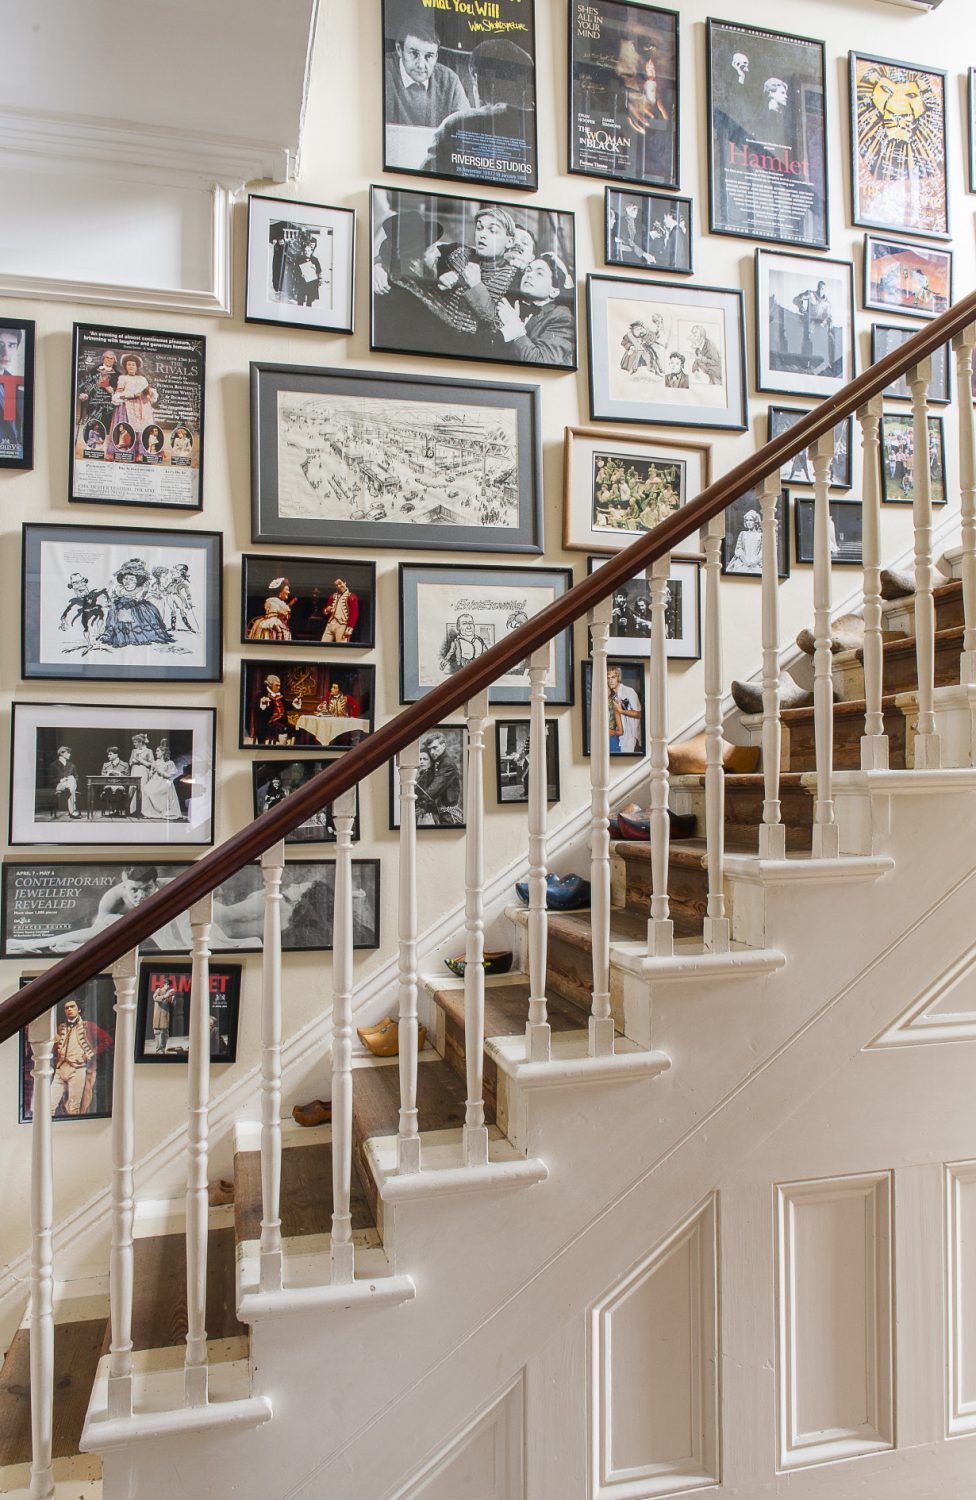 Framed posters and publicity shots line the staircase wall showcasing the many roles Catherine’s husband has played